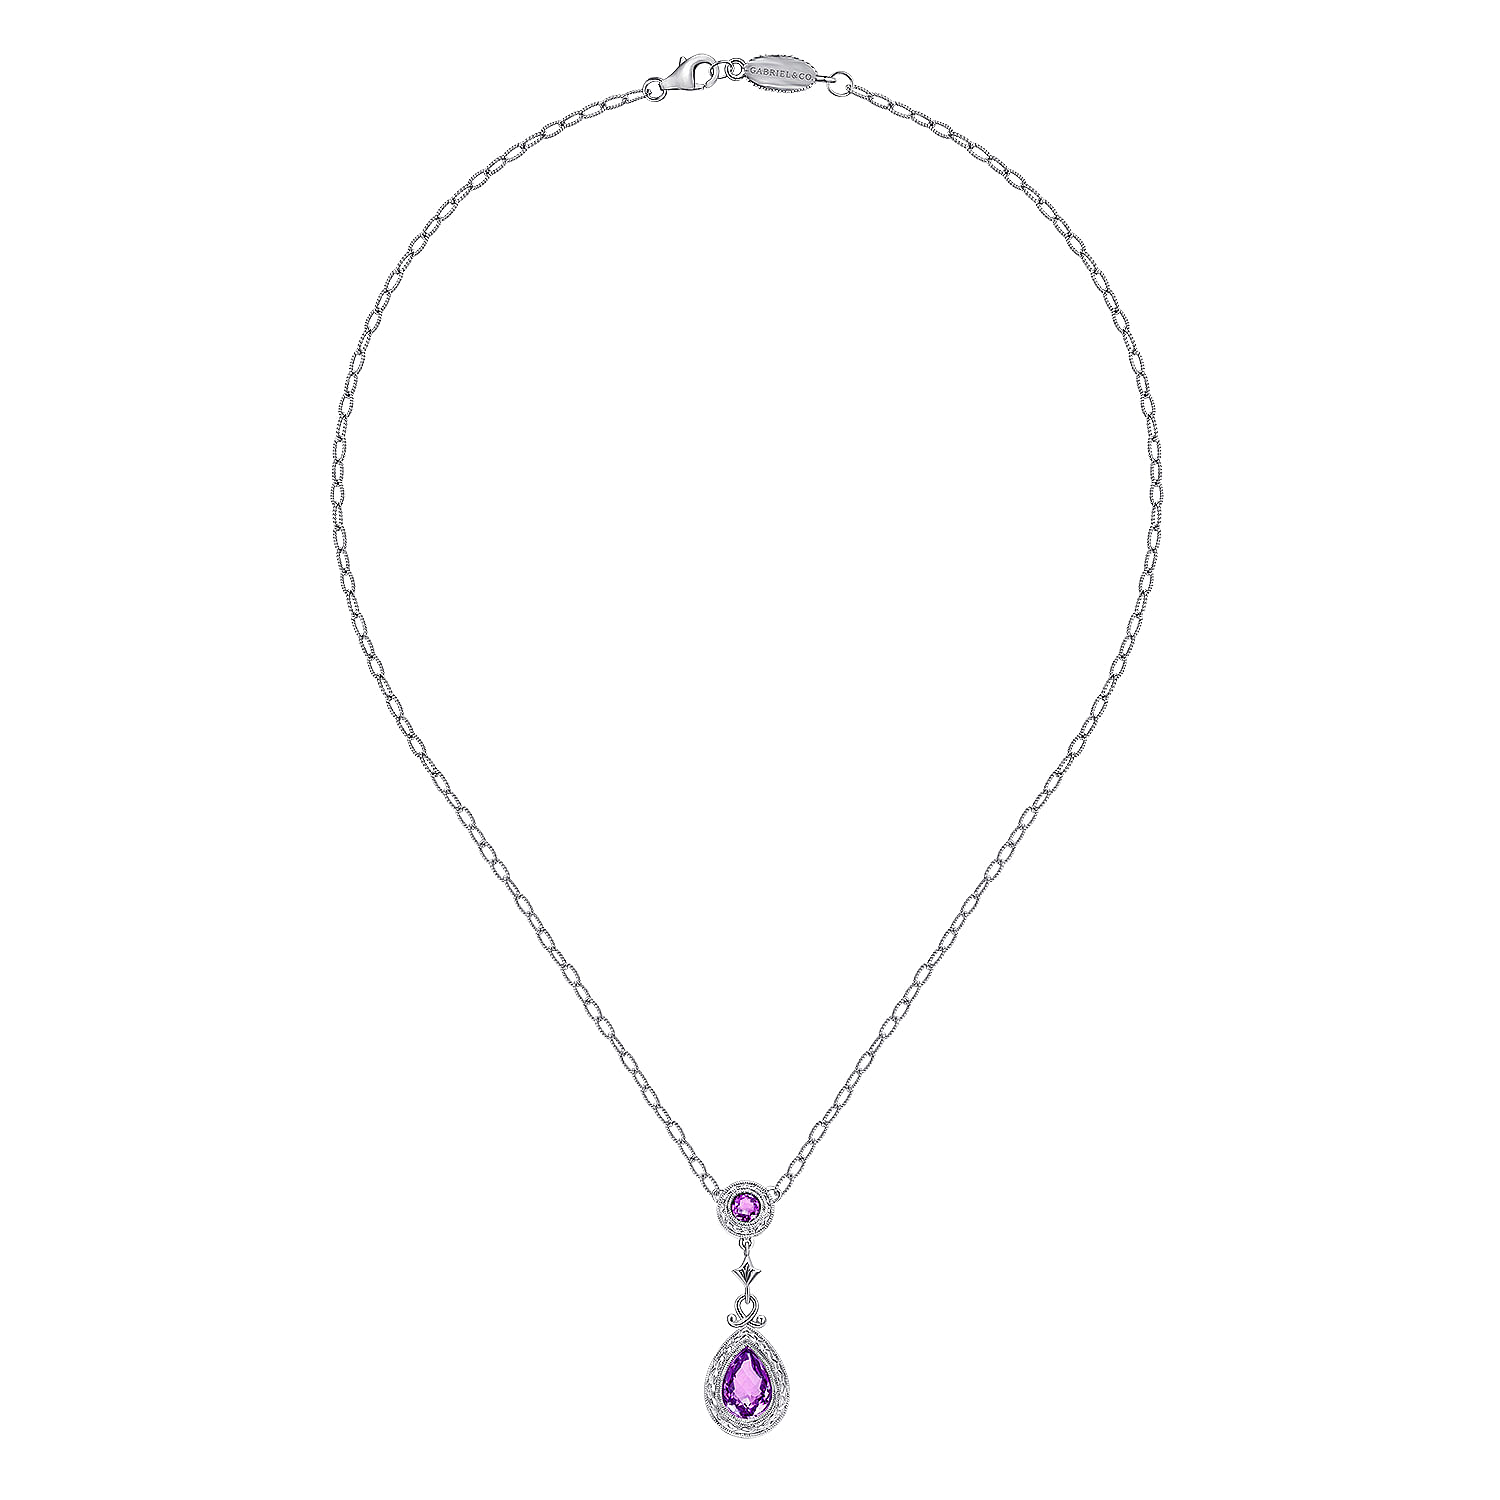 18 inch 925 Sterling Silver Amethyst Drop Pendant Necklace